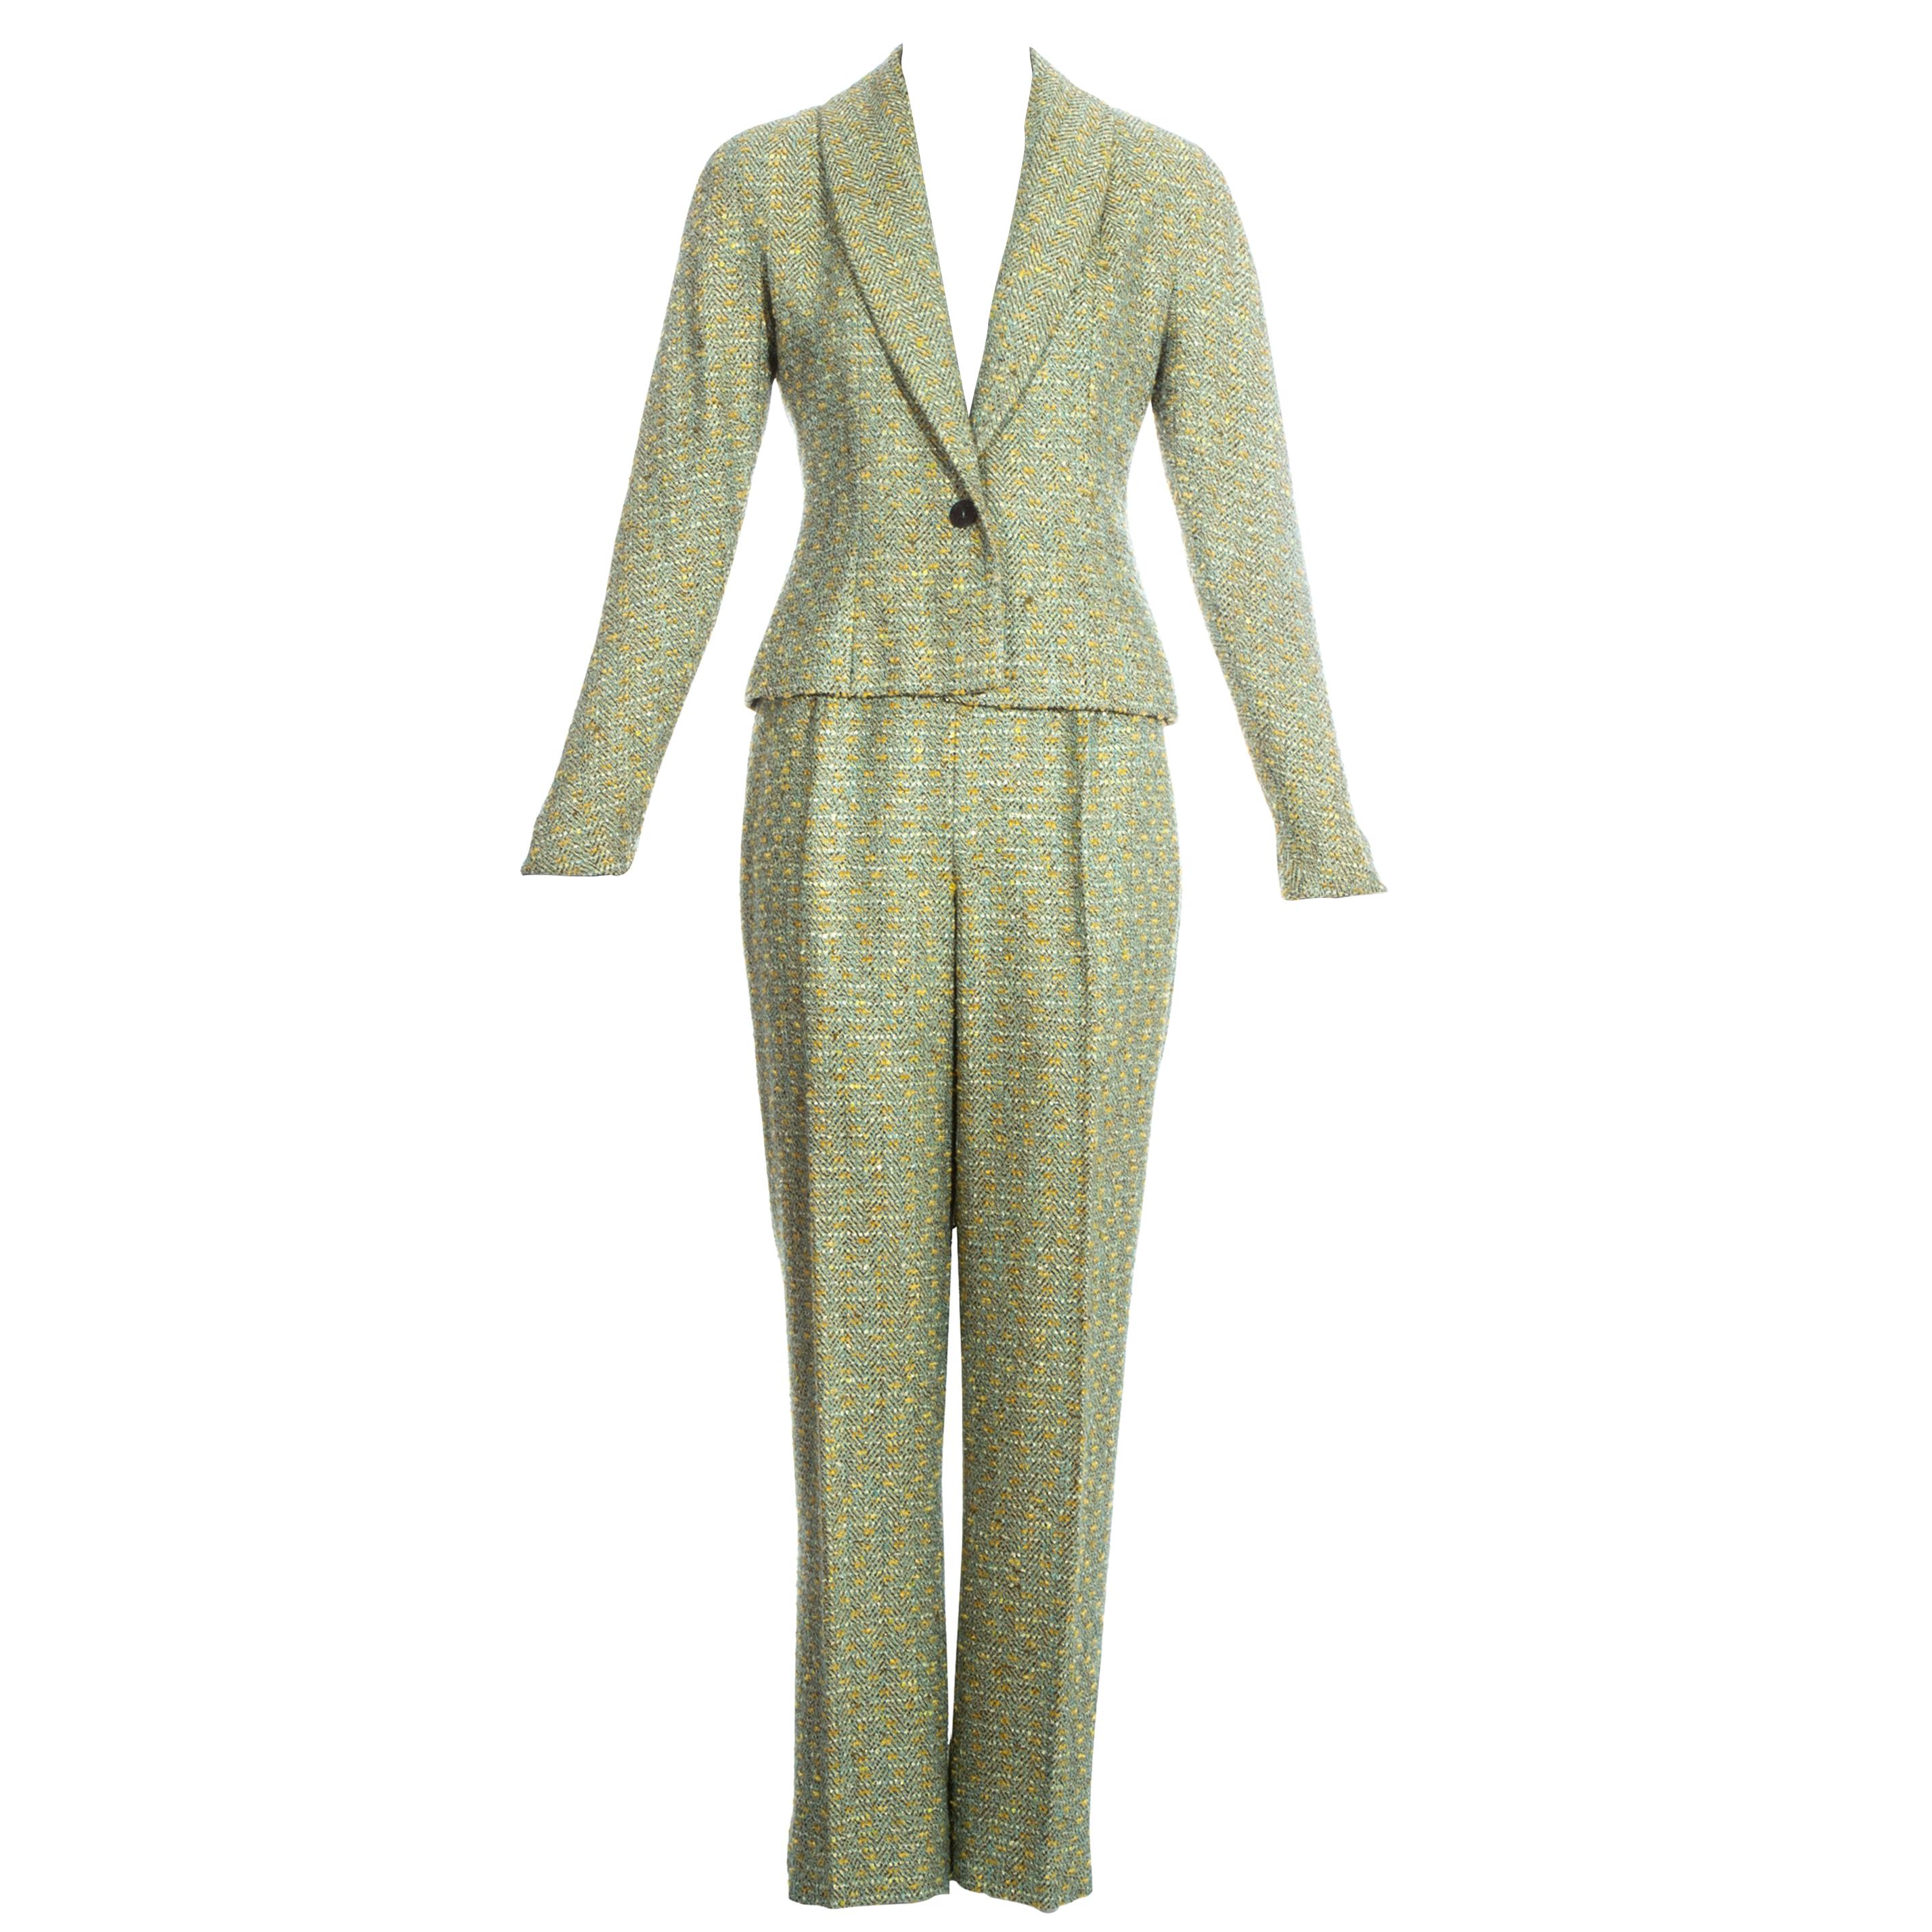 Three Piece Tweed Suits - 8 For Sale on 1stDibs